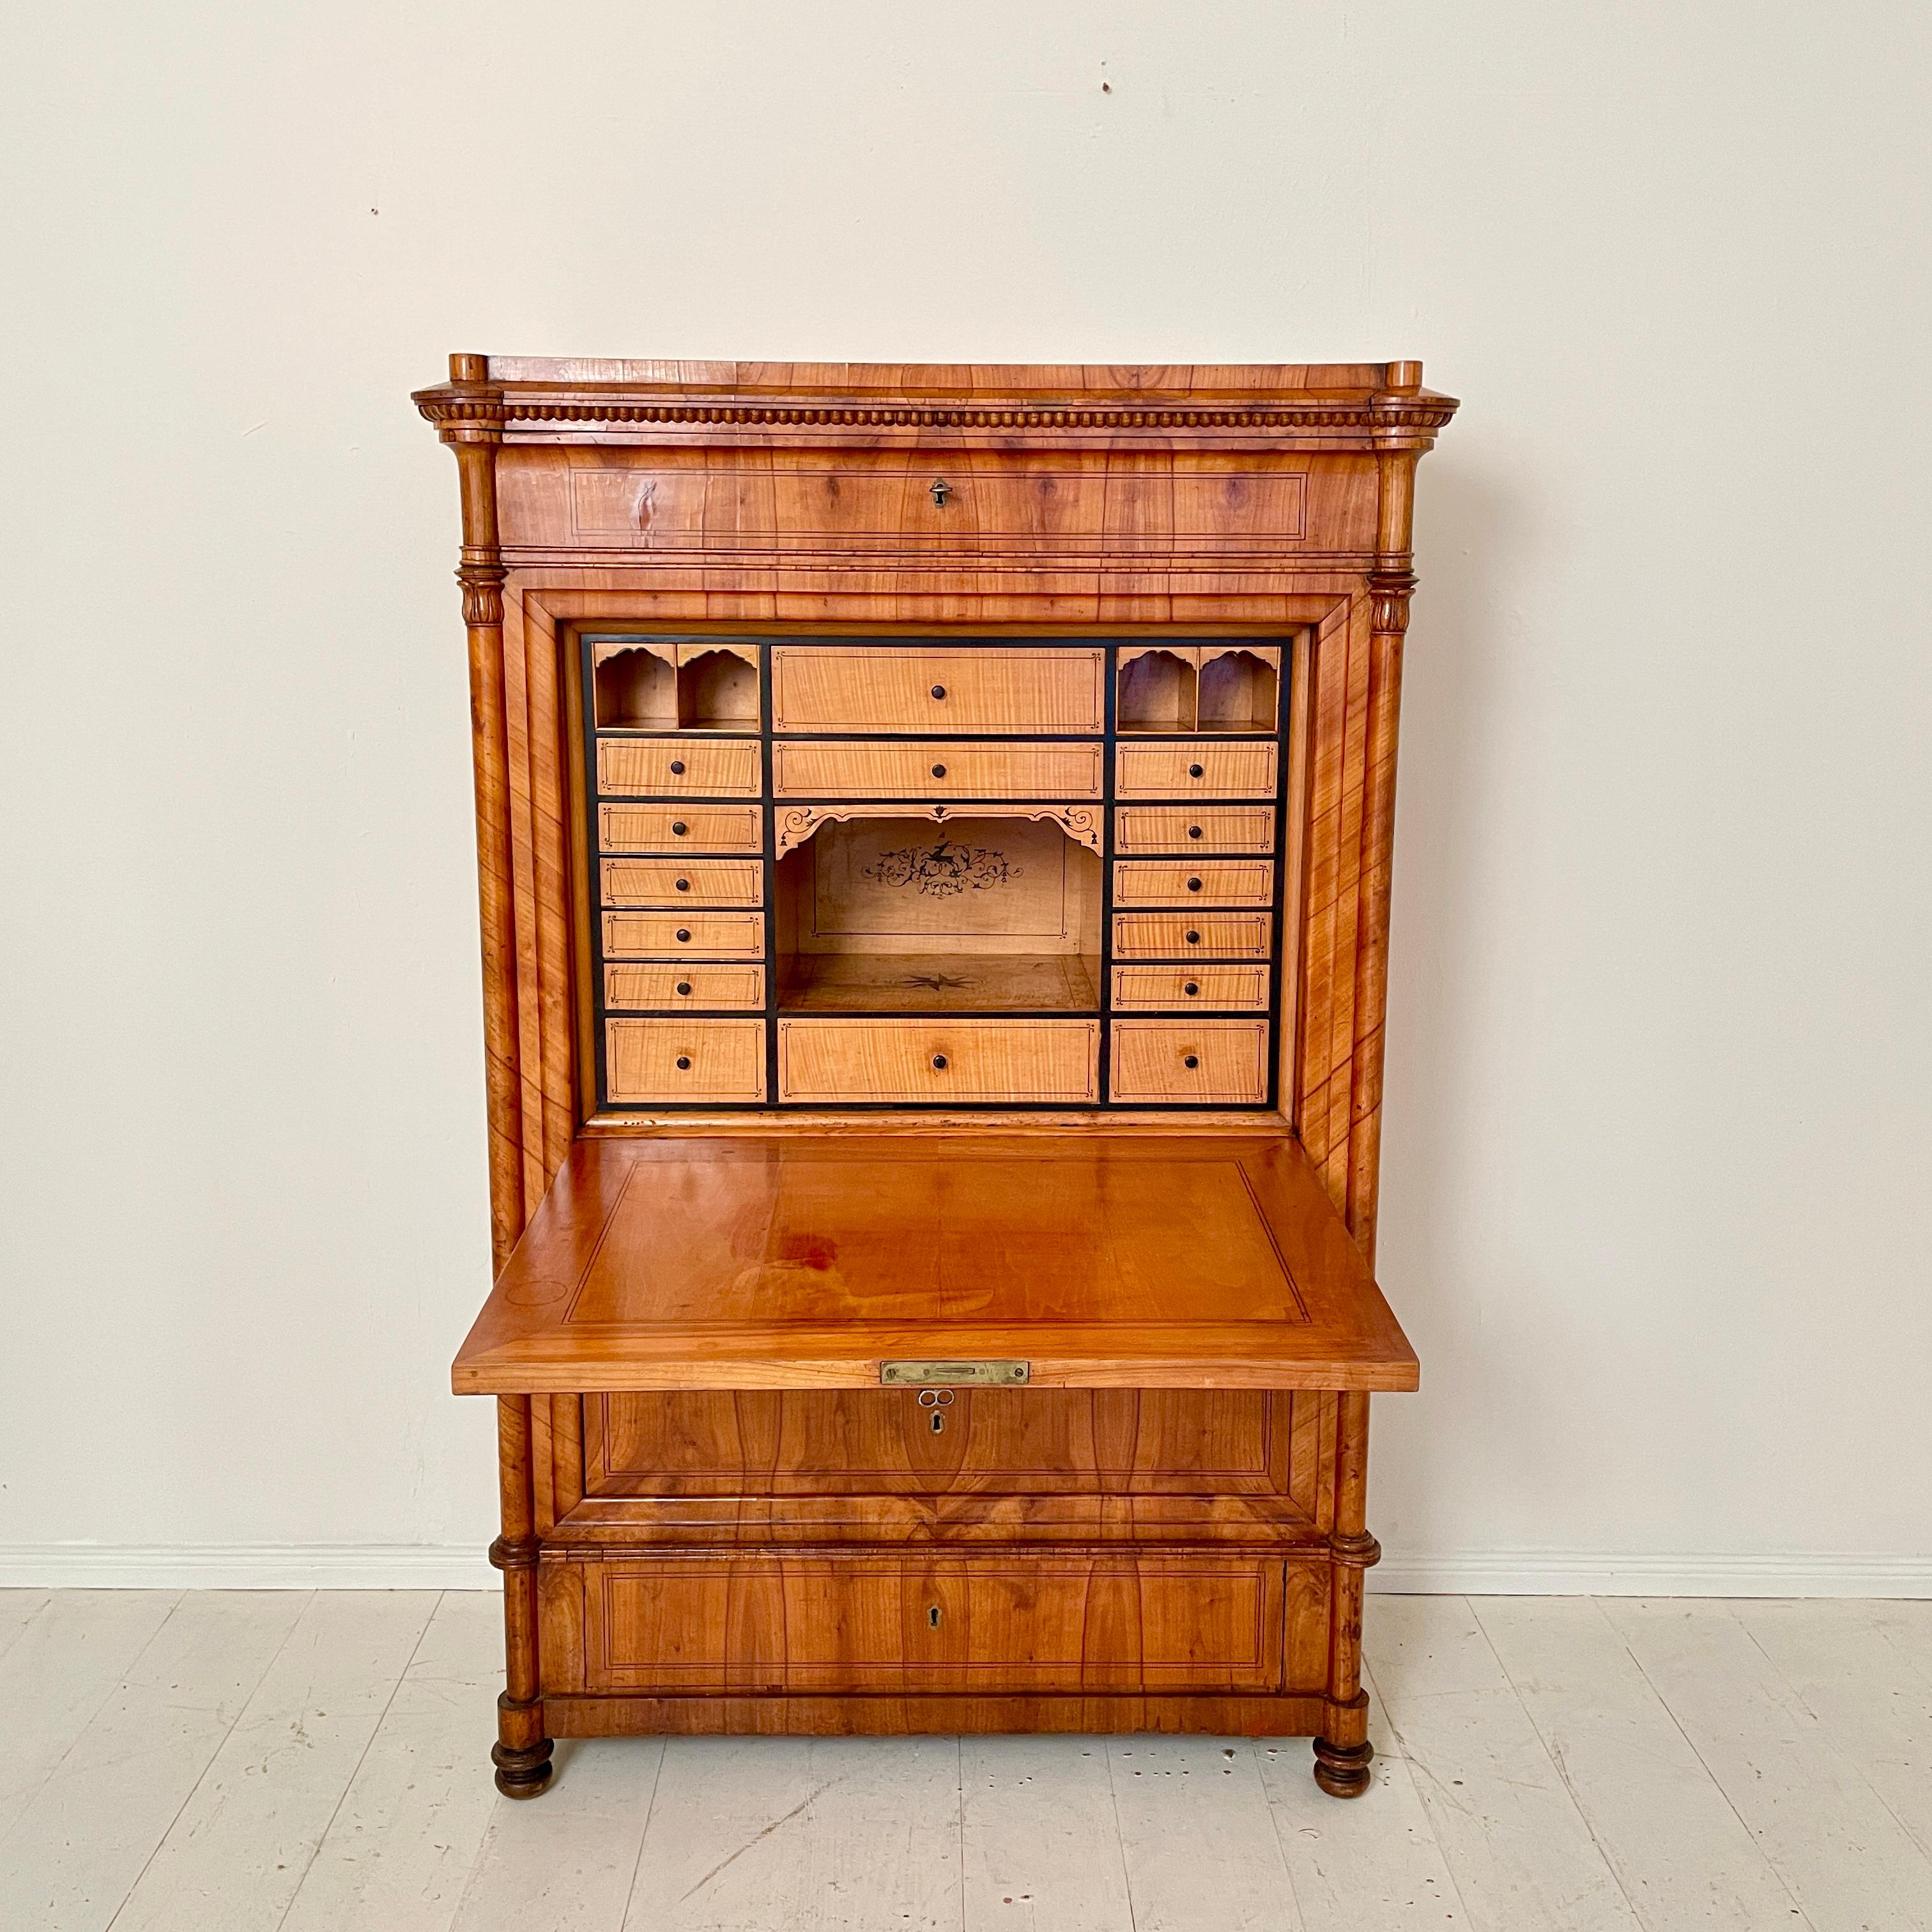 This beautiful 19th century Biedermeier Secretary is made out of Pine and veneered in Cherry wood. The inside is veneered in maple and solid maple. It was made around 1835 in South Germany.

A unique piece which is a great eye-catcher for your